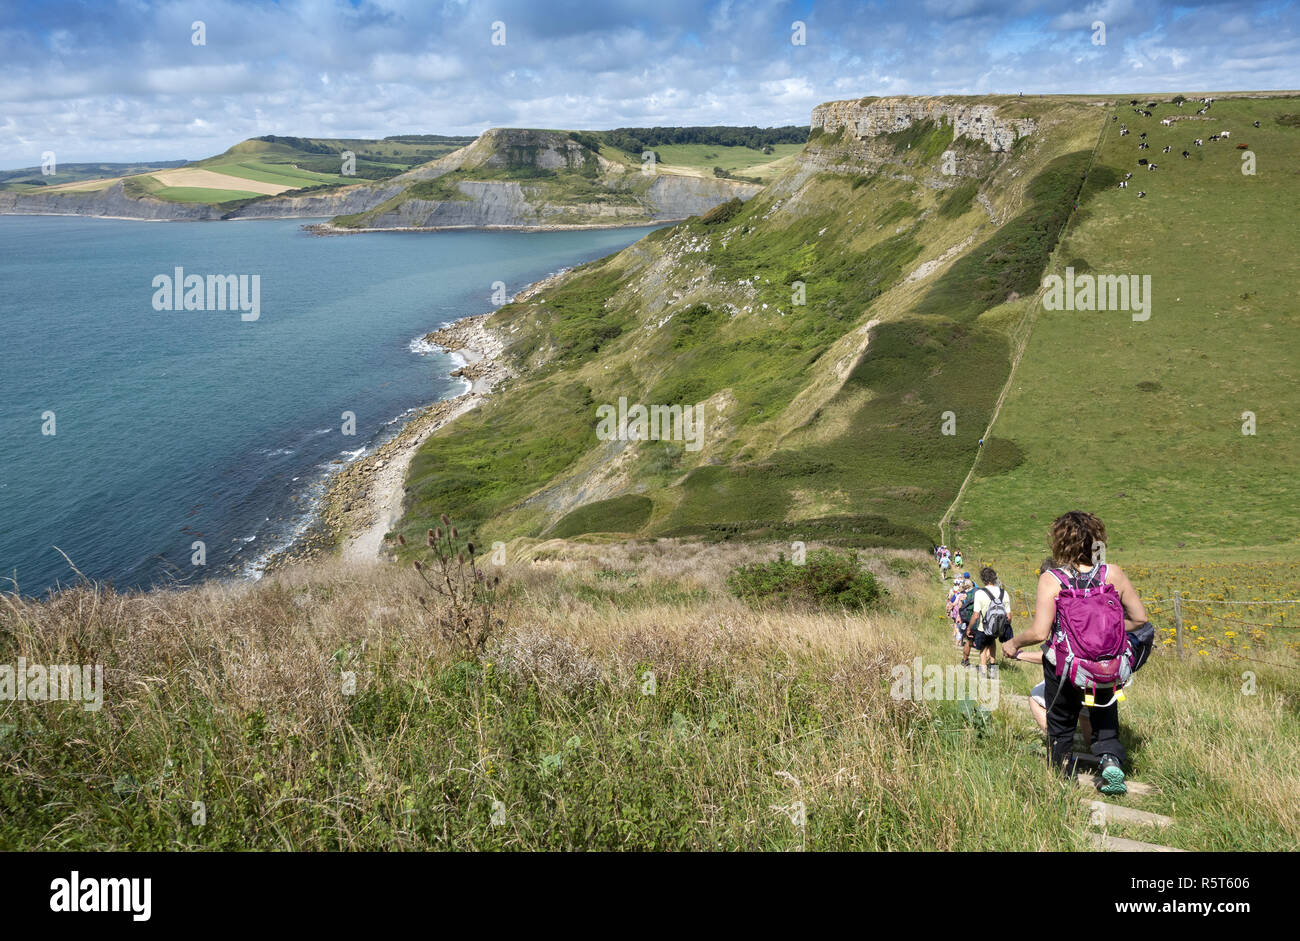 View over Emmetts Hill and Chapman's Pool on the Jurassic Coast, Isle of Purbeck, Dorset, England, UK Stock Photo